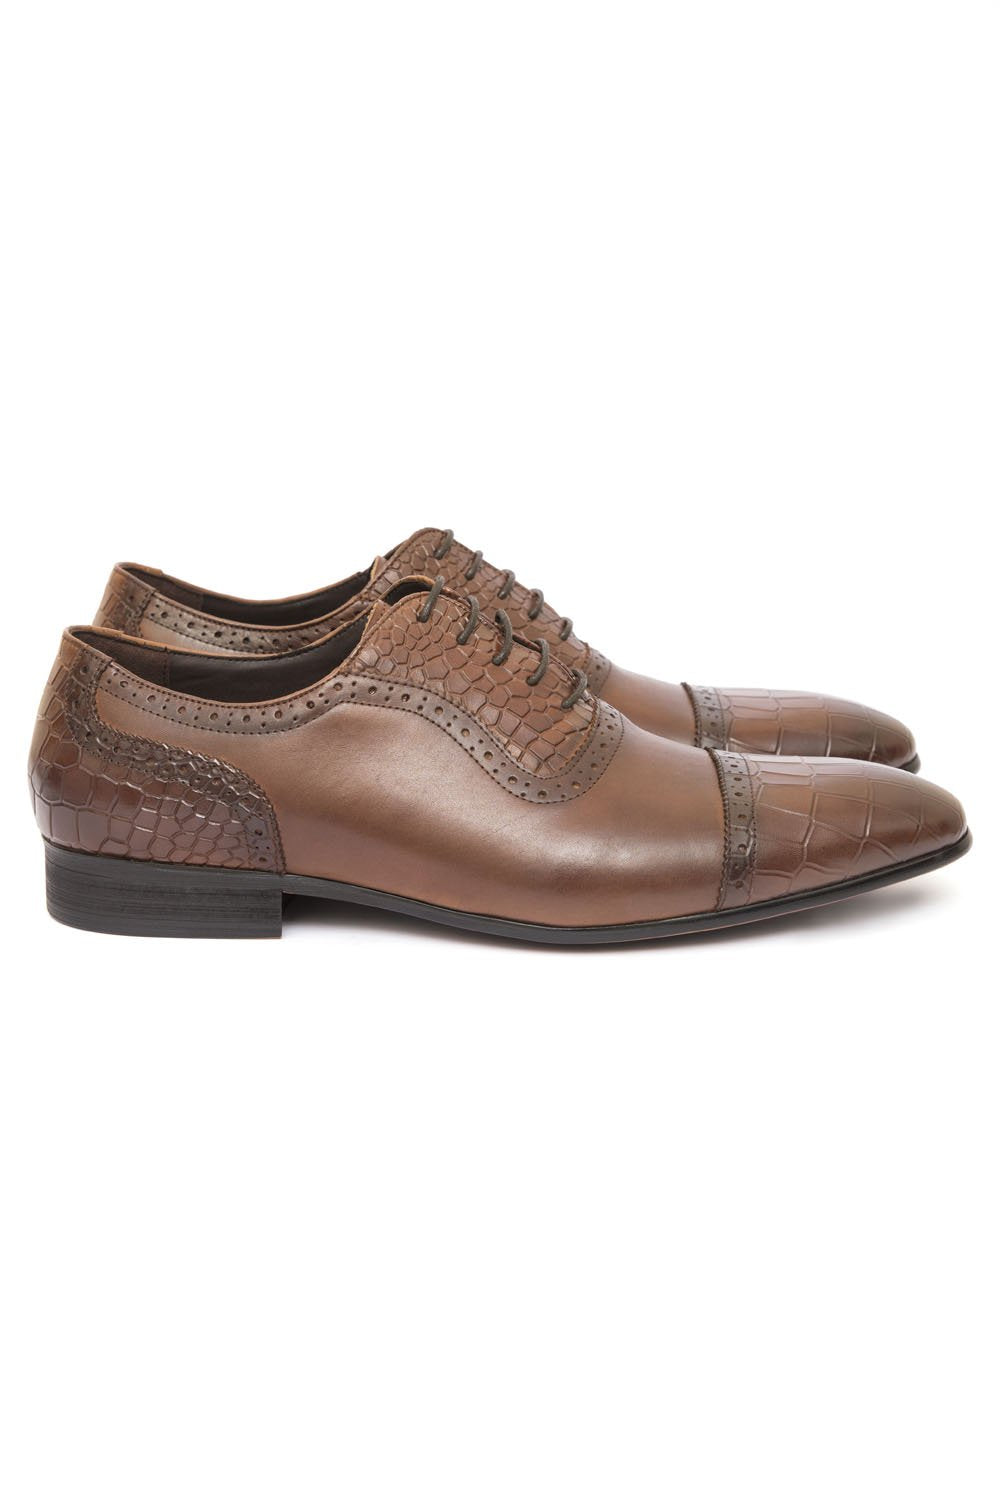 BROWN SMART LEATHER SHOES